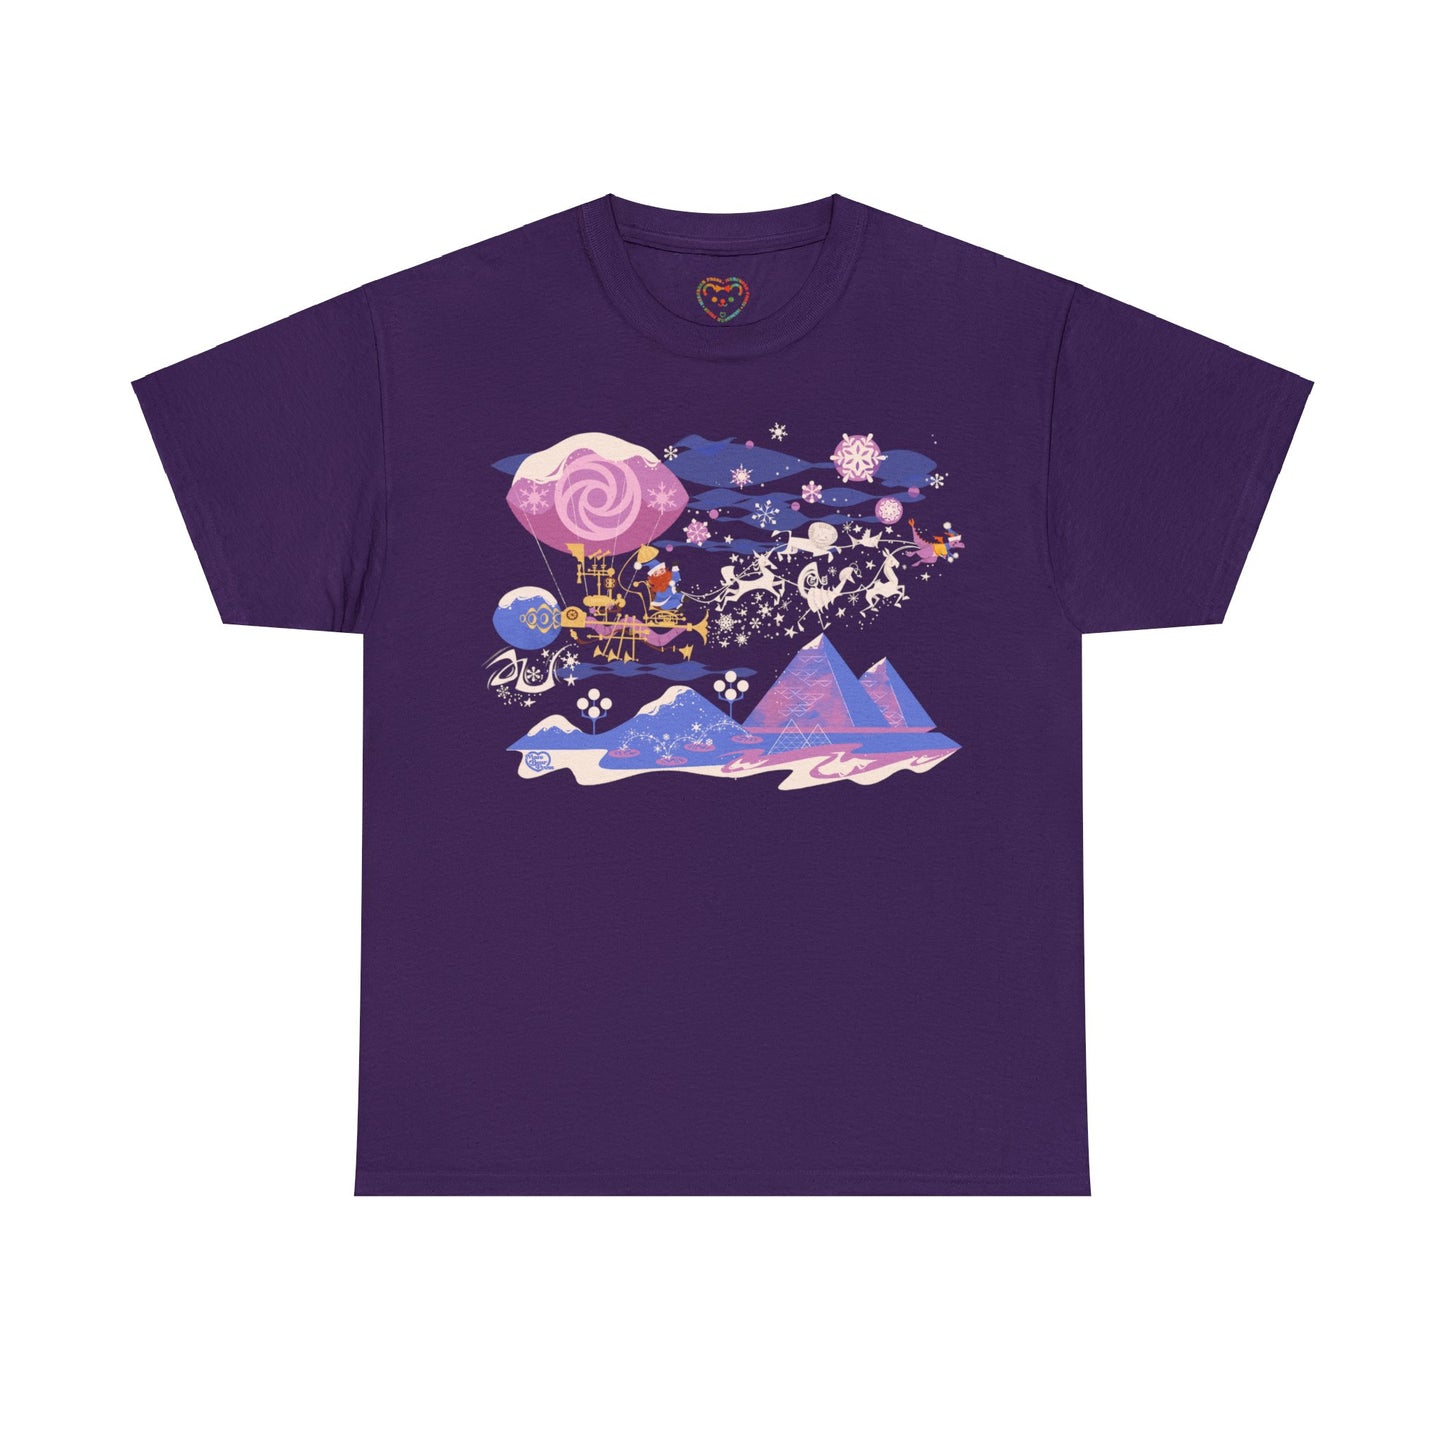 Dreamfinder is Coming To Town Tee